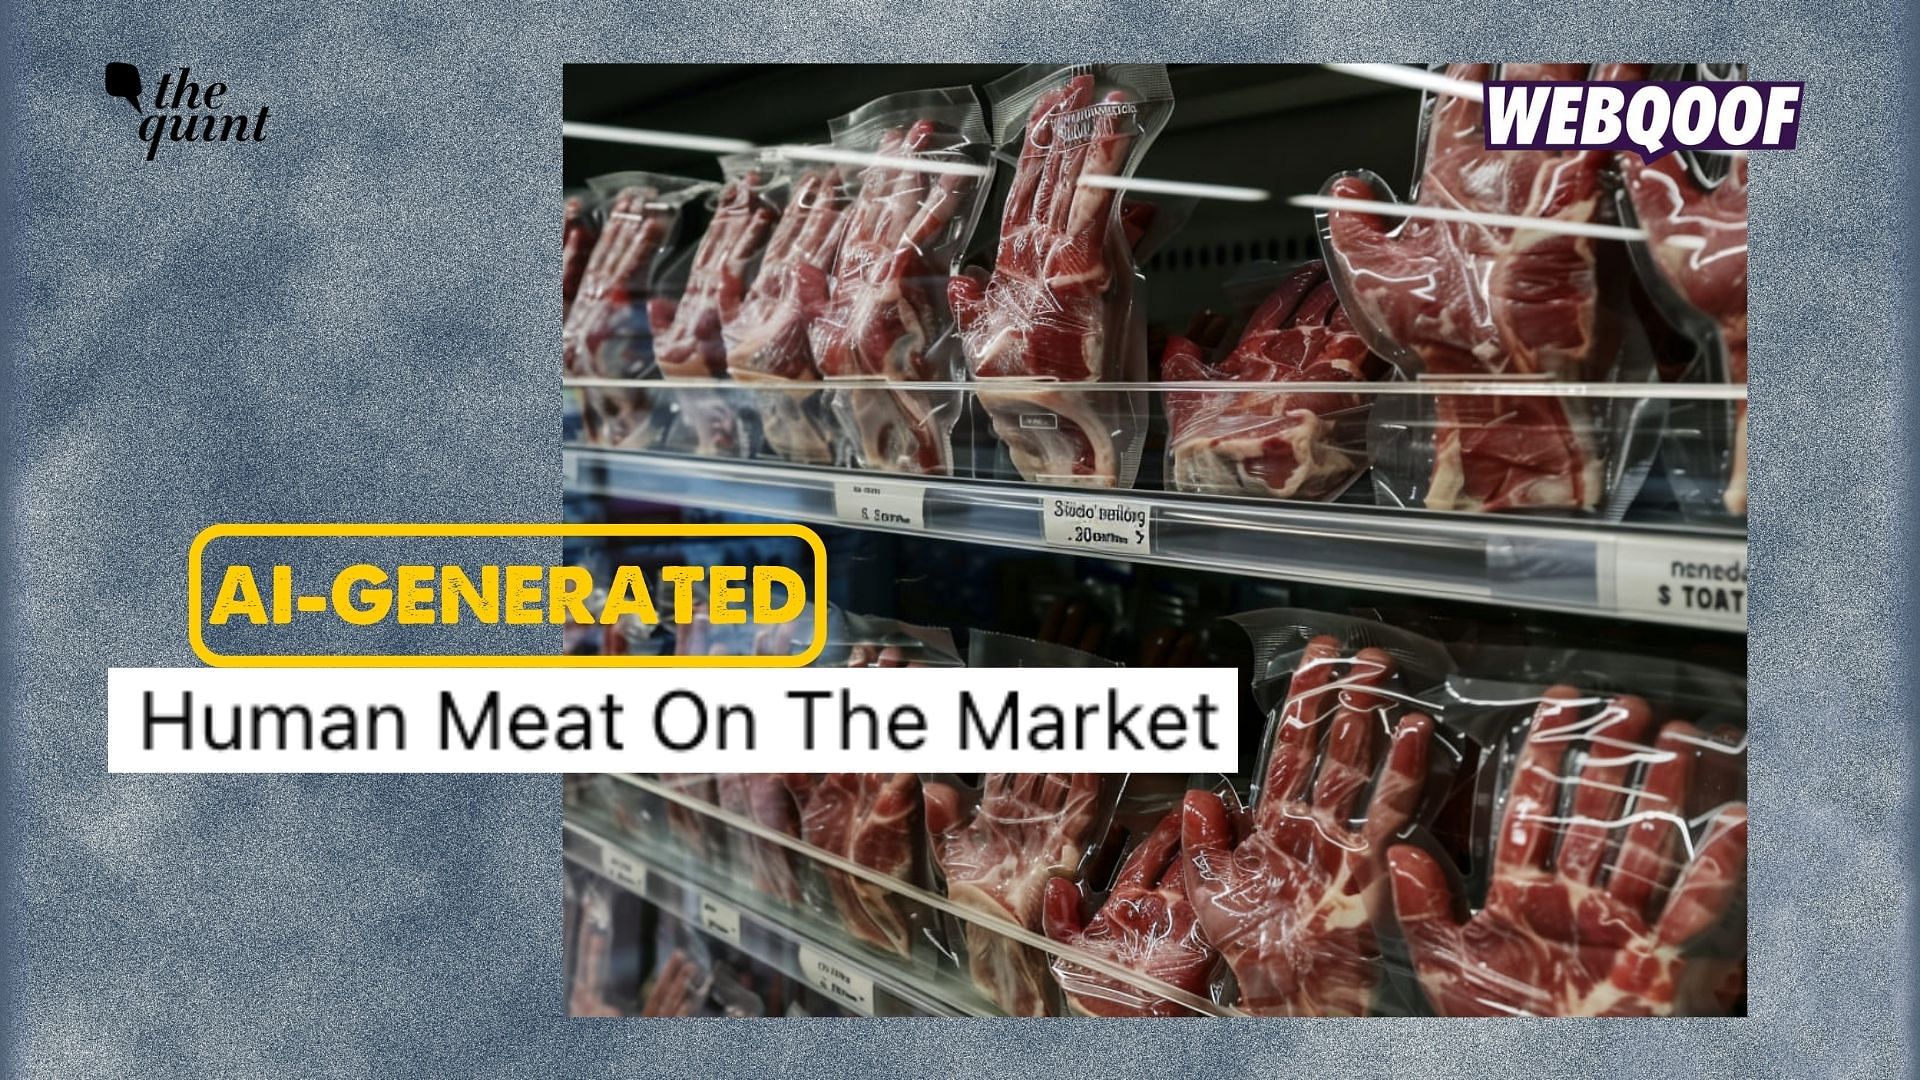 <div class="paragraphs"><p>This is not a real image of human meat being sold in supermarkets.</p></div>